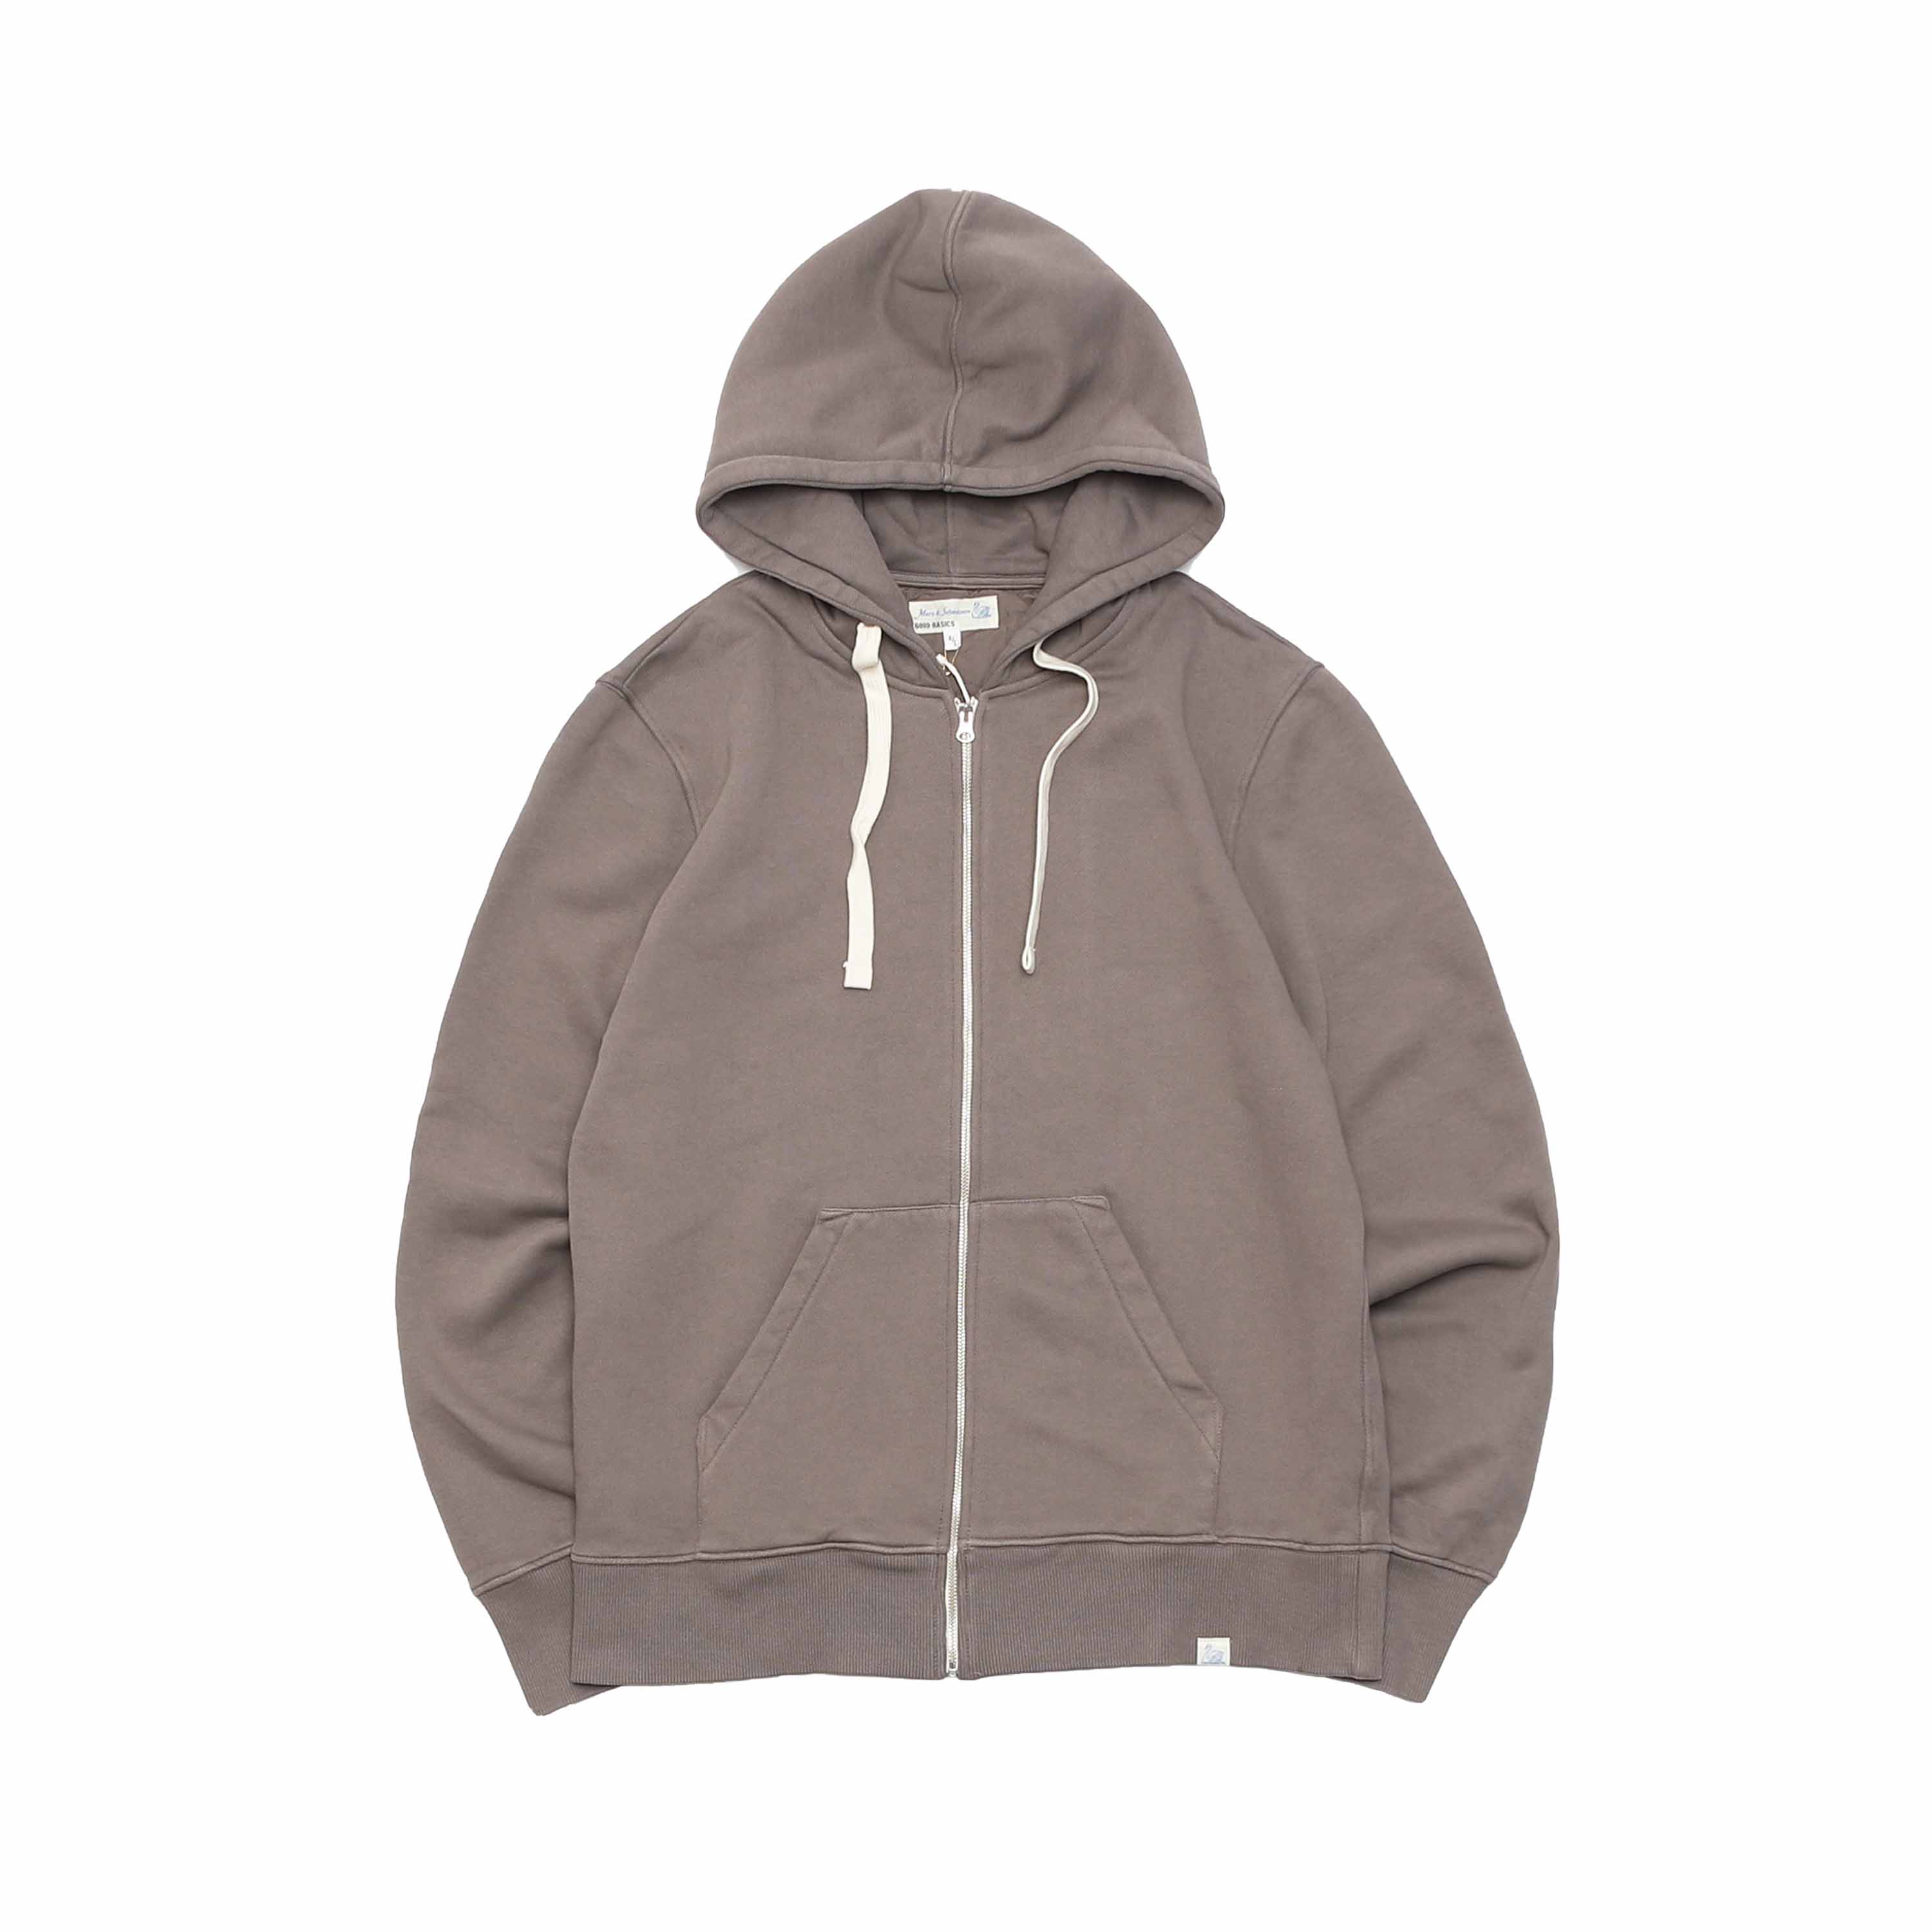 RELAXED FIT HOODED ZIP JACKET WASHED - GRAIN(HDJK02)